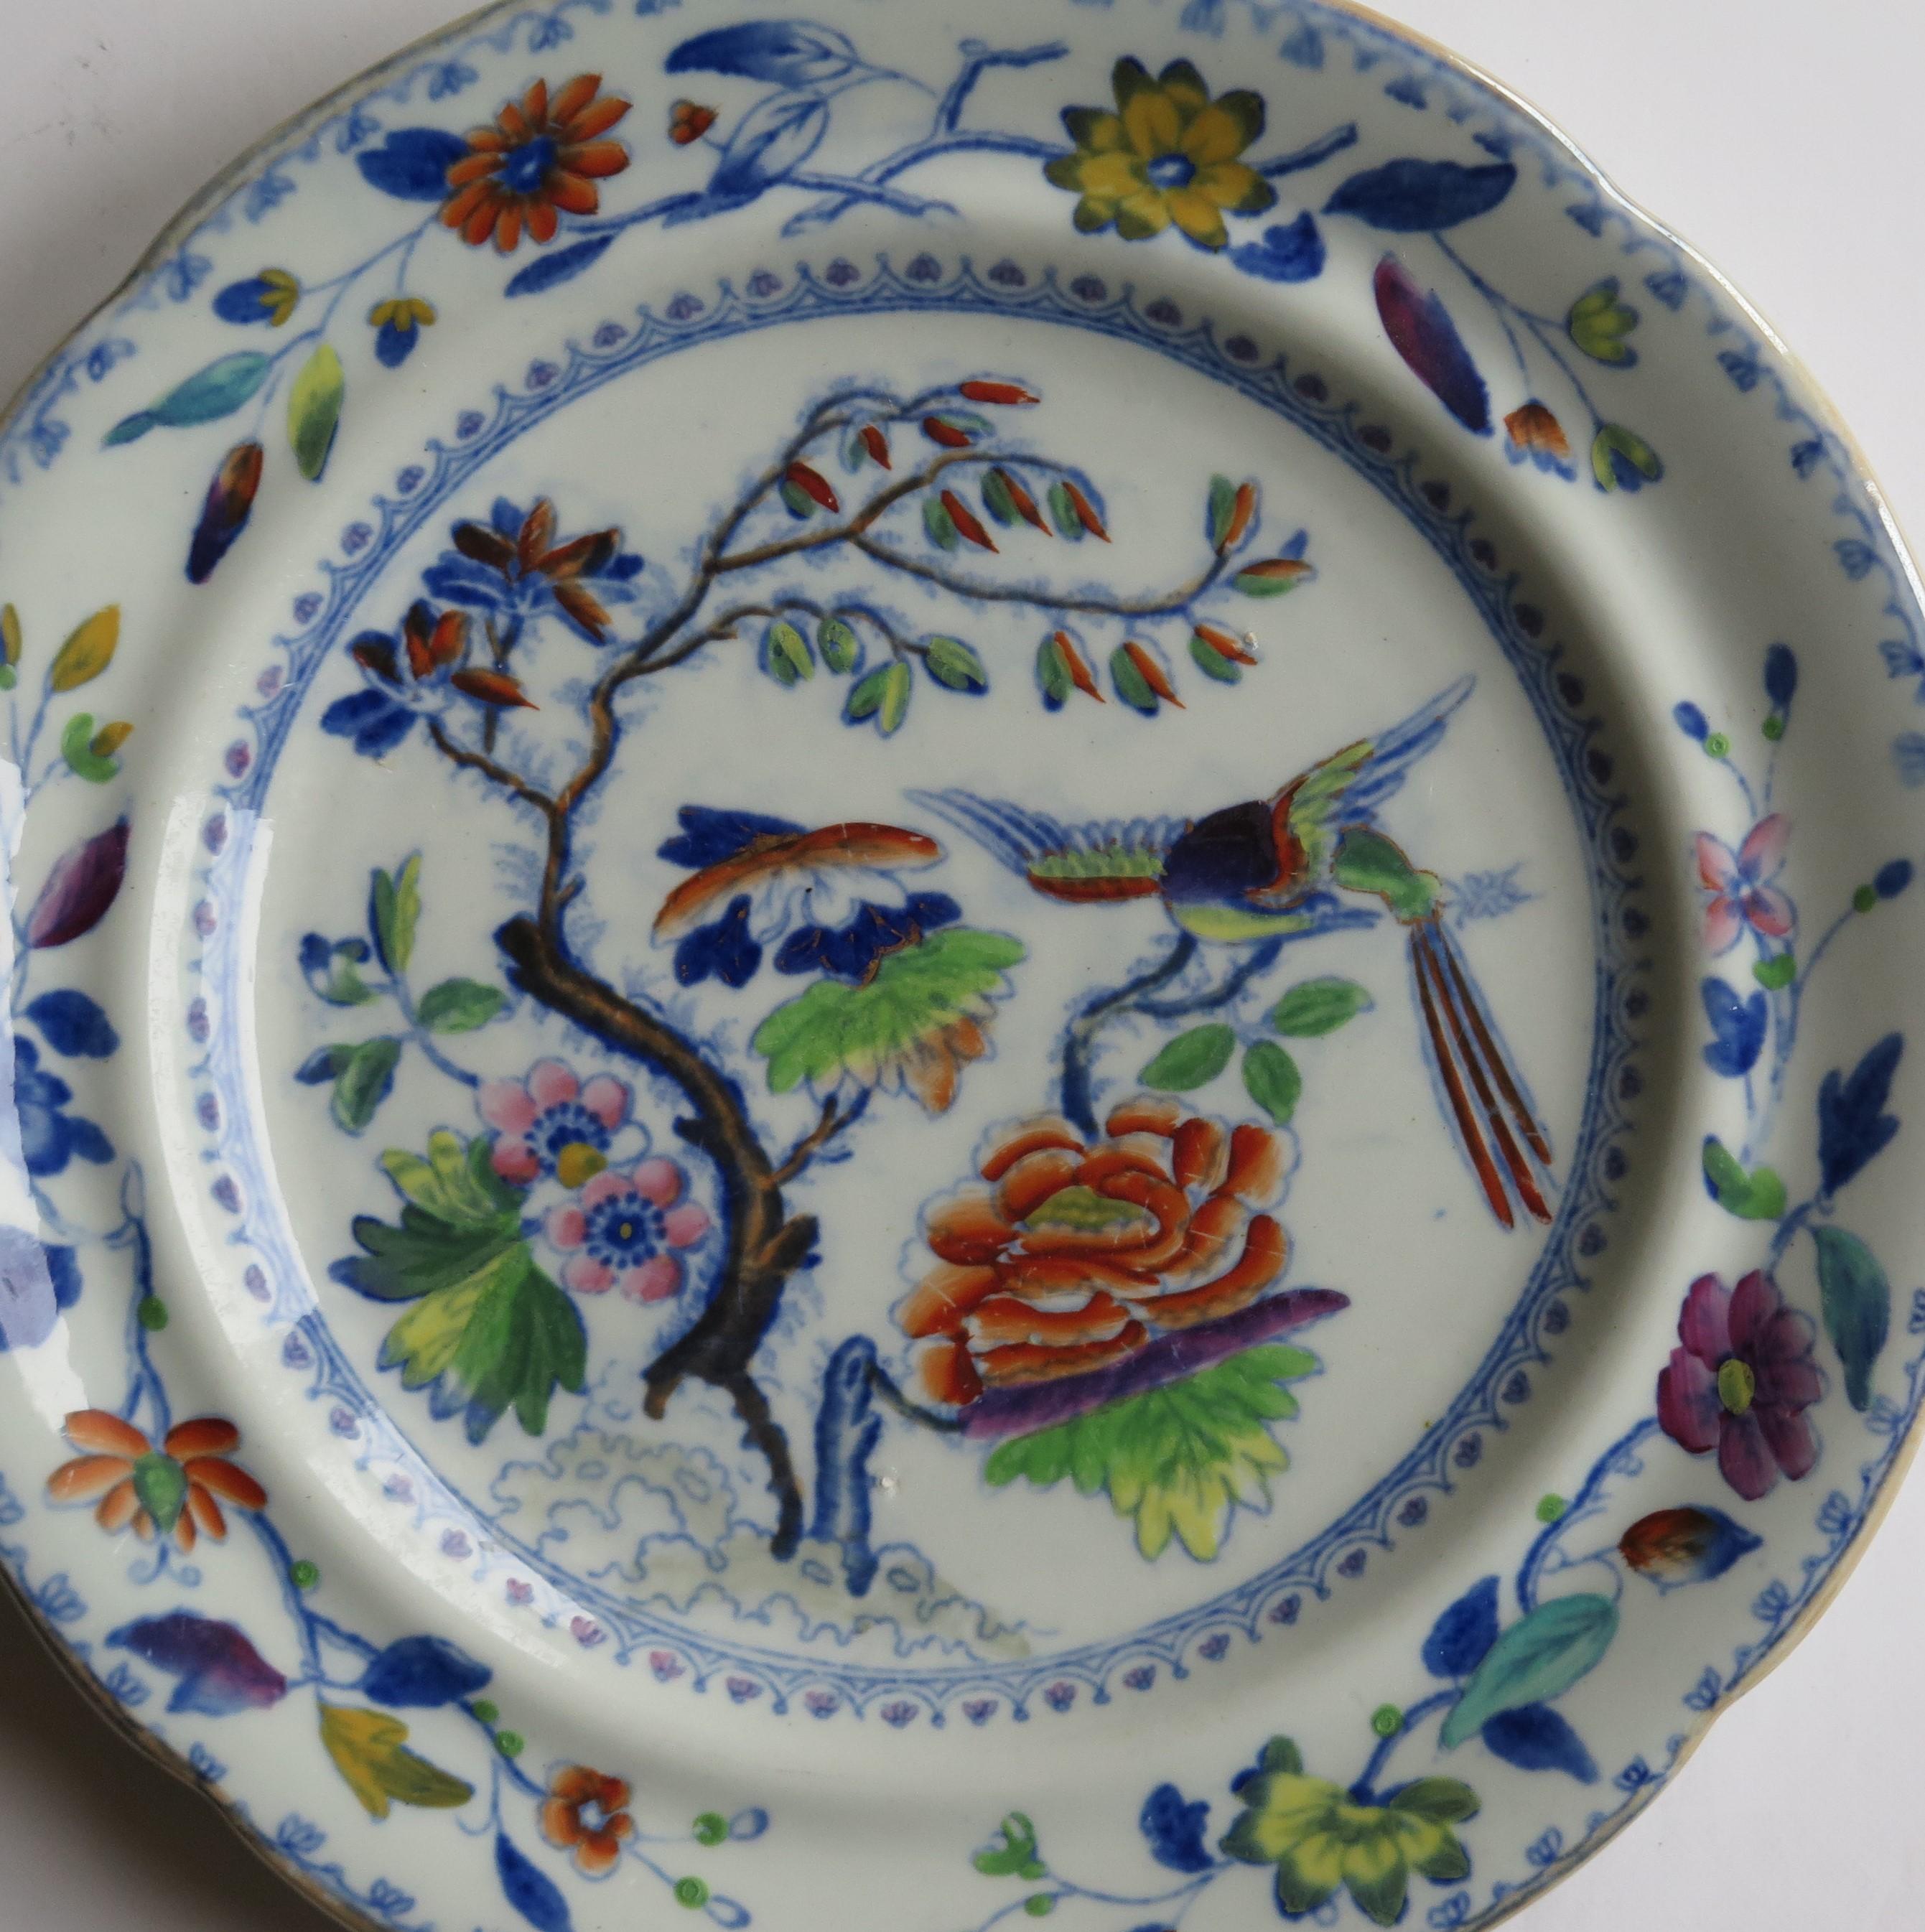 This is a good early hand painted ironstone (stone china) Side Plate, made by William Davenport and Co., Longport, Staffordshire Potteries, England, George 111rd period, circa 1815.

The plate is well potted and hand painted, probably over a blue